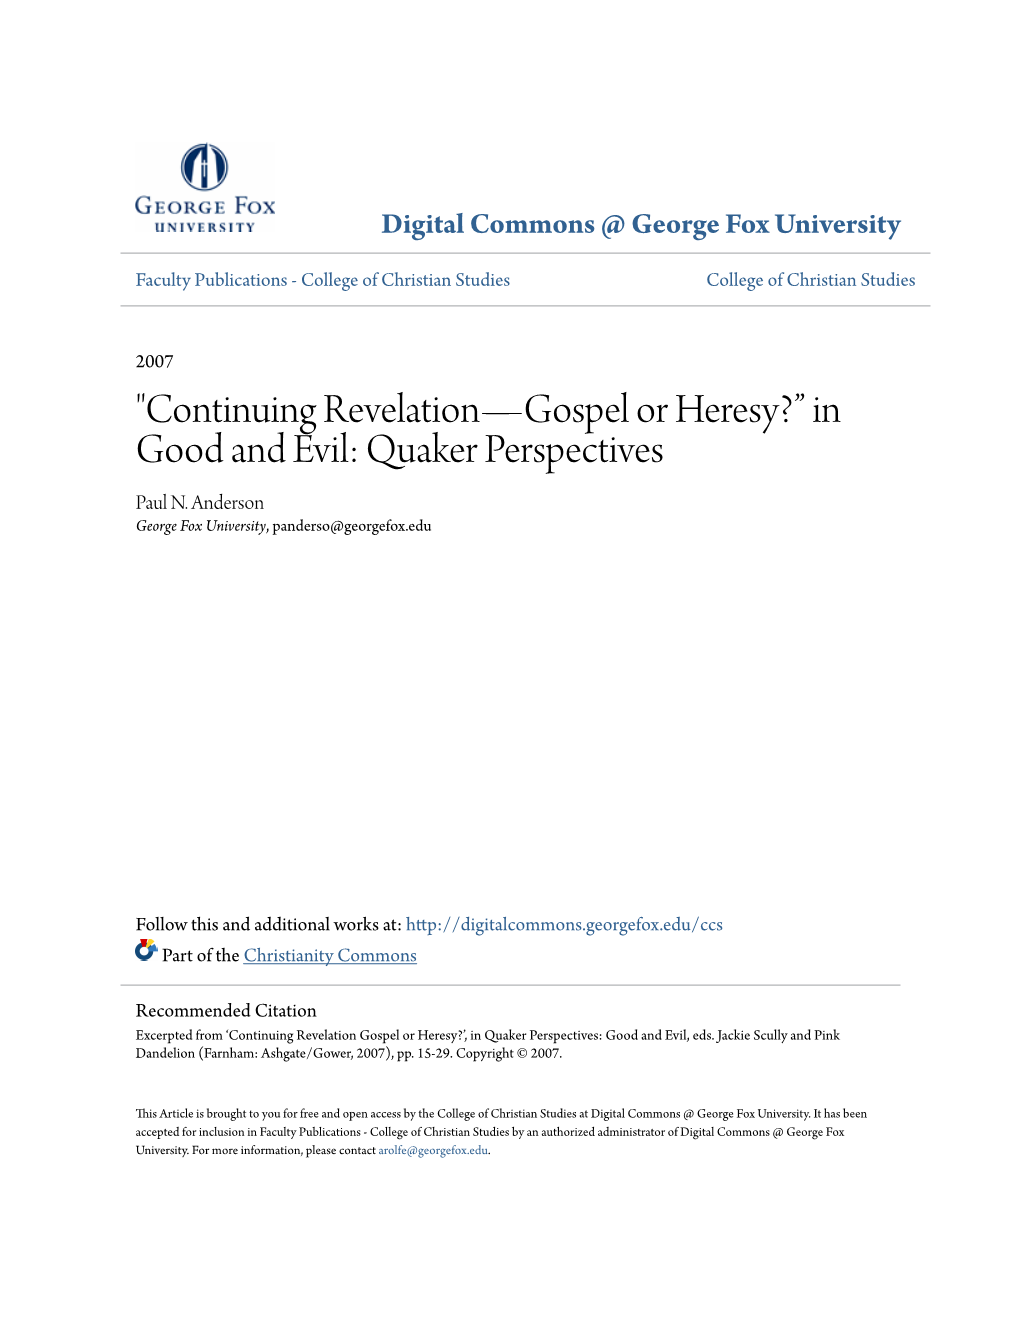 Continuing Revelation—Gospel Or Heresy?” in Good and Evil: Quaker Perspectives Paul N